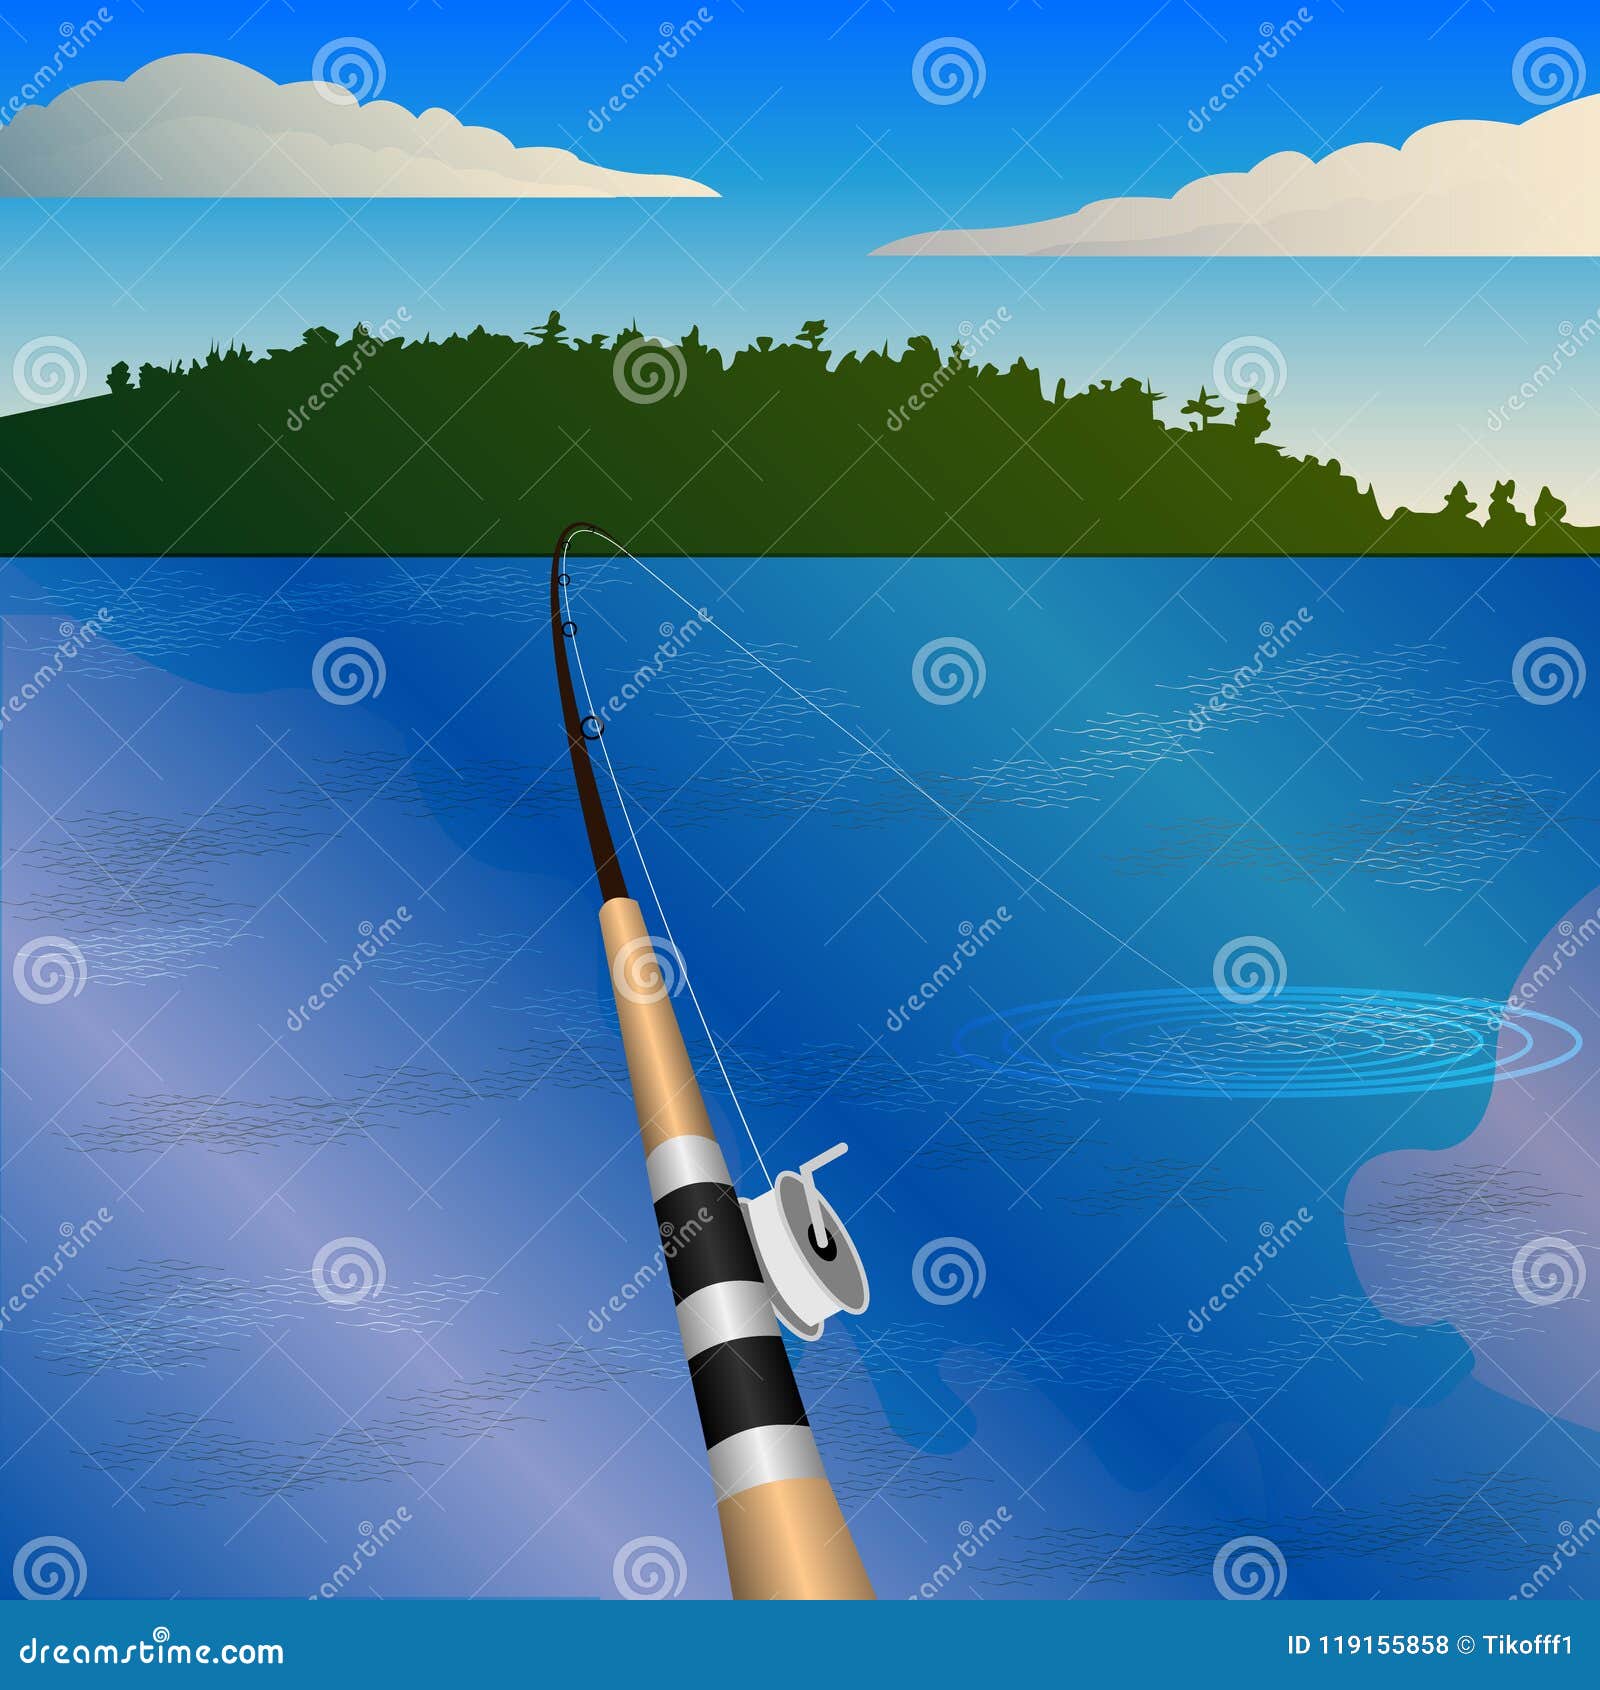 Fishing Rod with a Reel, Bite. Fishing, First-person View, Pond